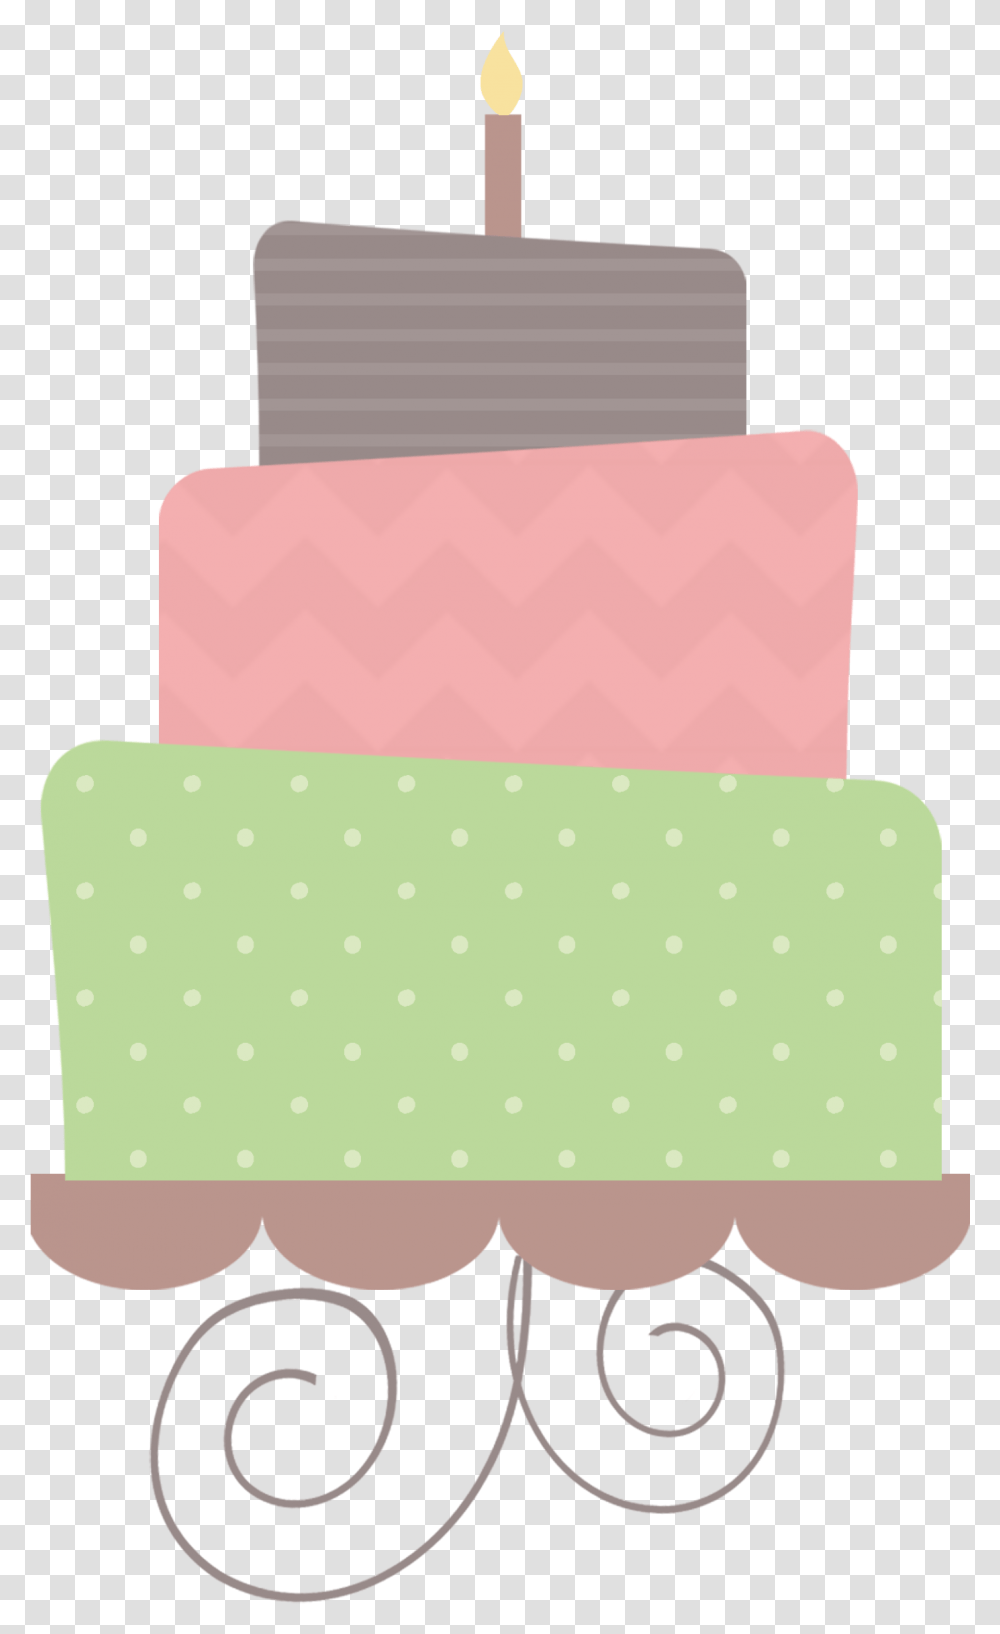 Download For Free Cake In High Resolution 26286 Free Birthday Cake, Texture, Cushion, Dessert, Food Transparent Png